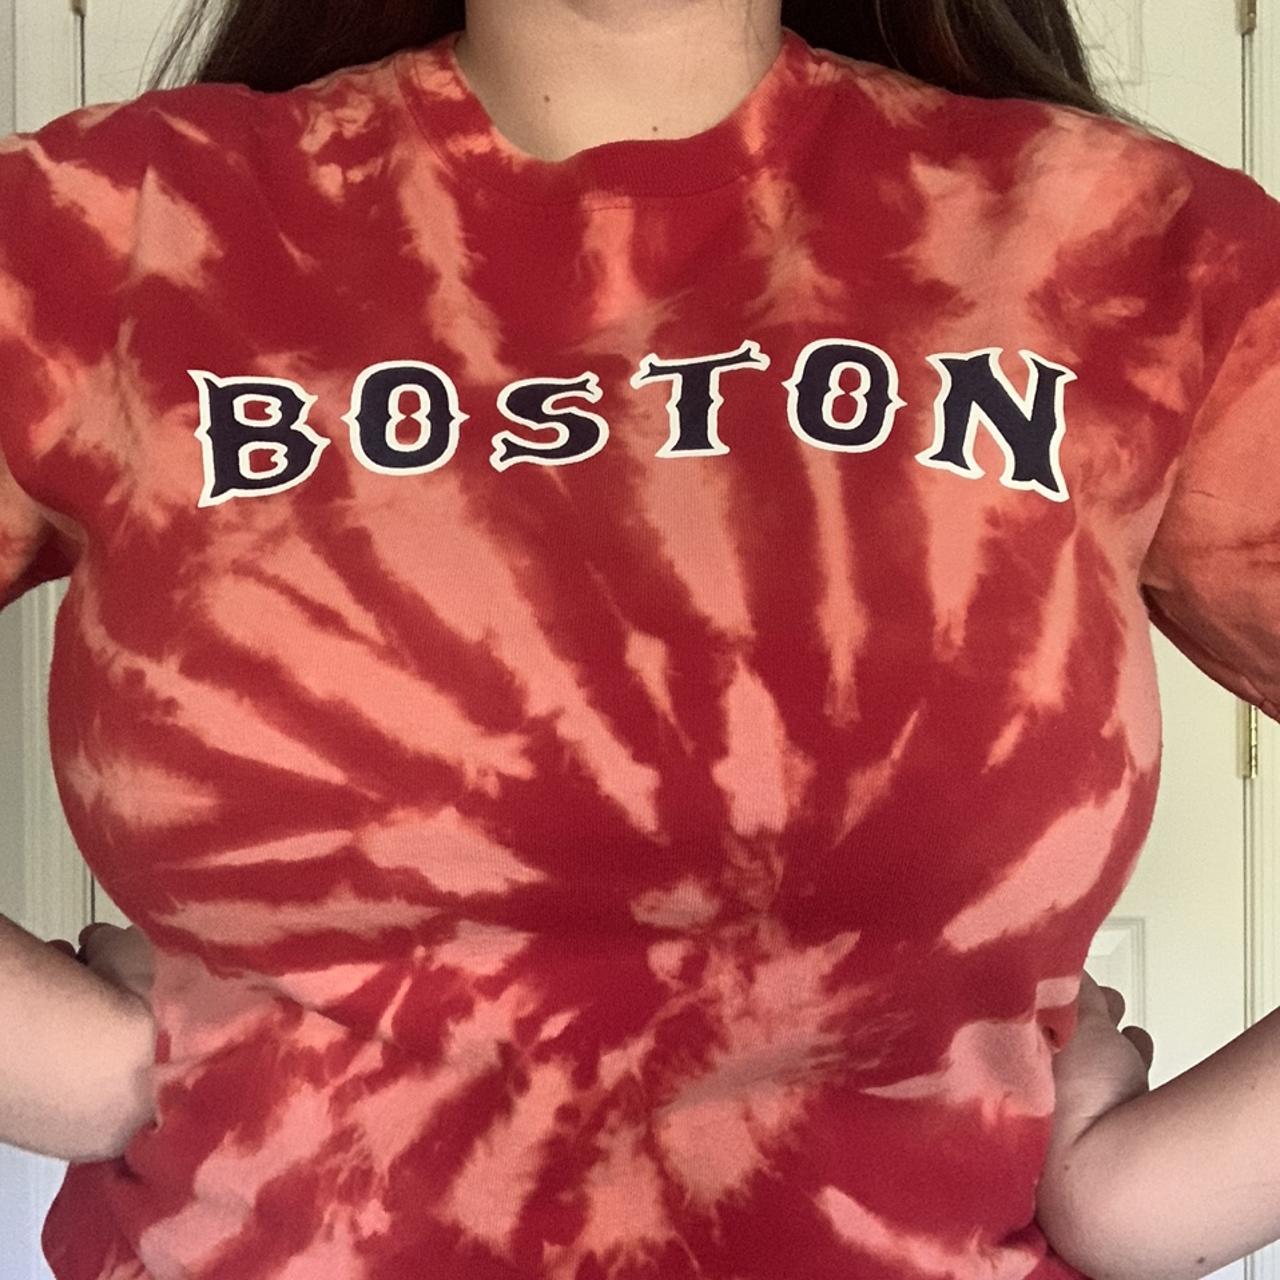 Product Image 2 - Bleach Dyed Boston Tshirt
Only worn